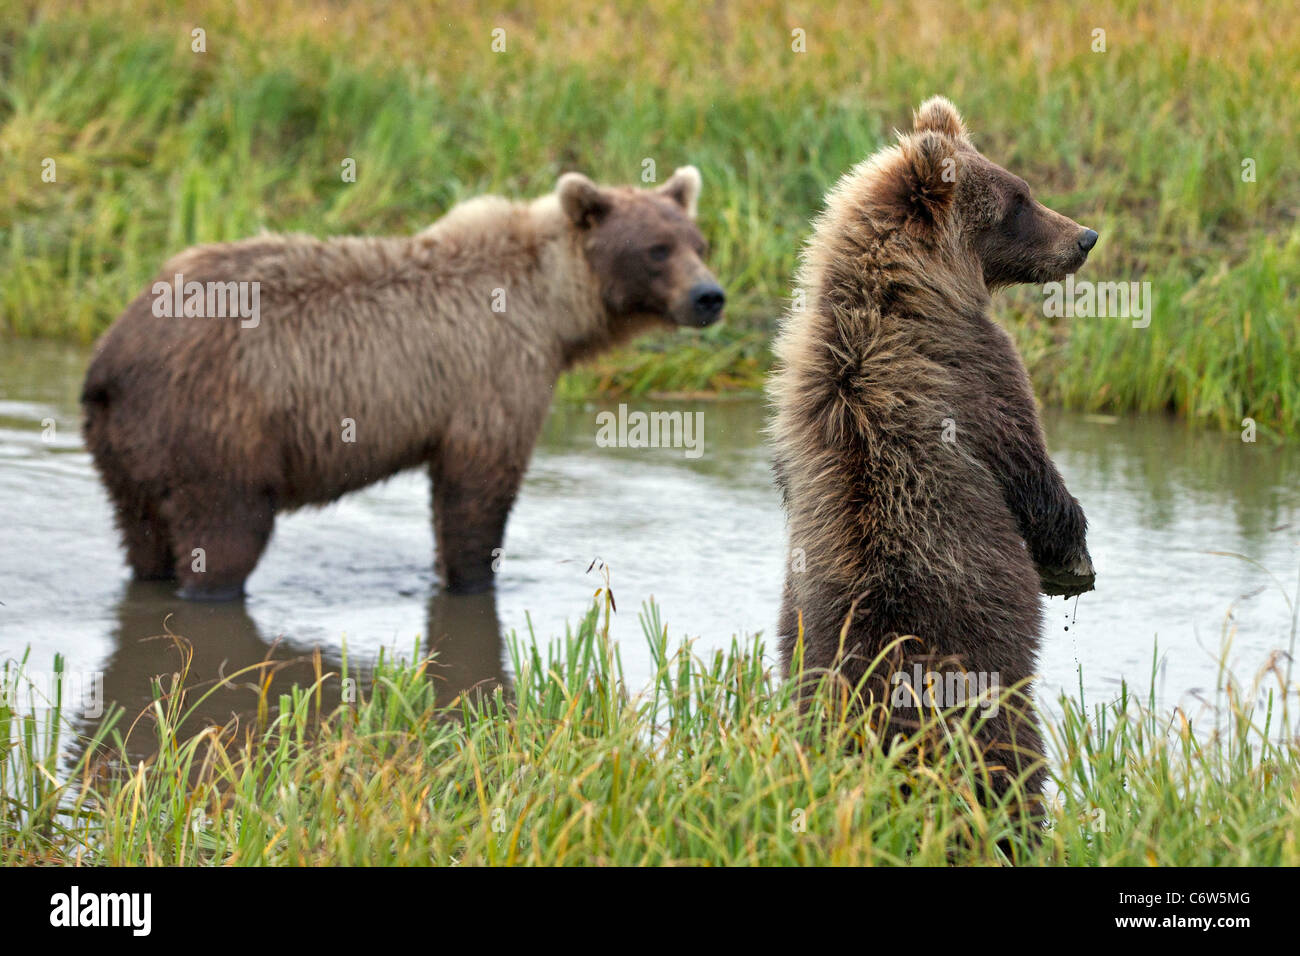 North American brown bear sow and cub standing in creek, Lake Clark National Park, Alaska, United States Stock Photo